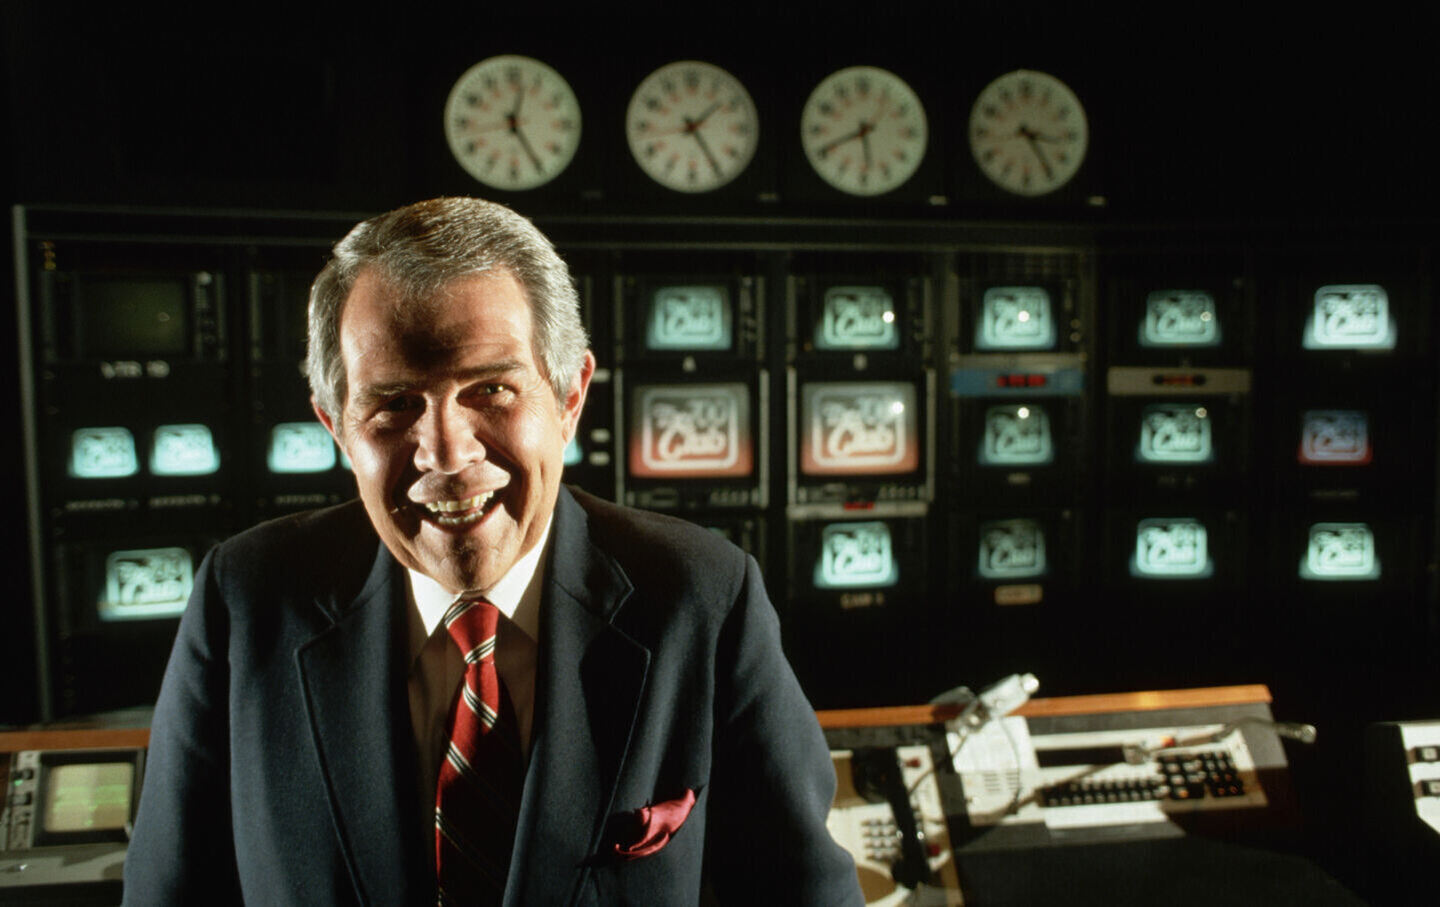 Television evangelist and conservative political activist Pat Robertson poses in the control room for his TV show